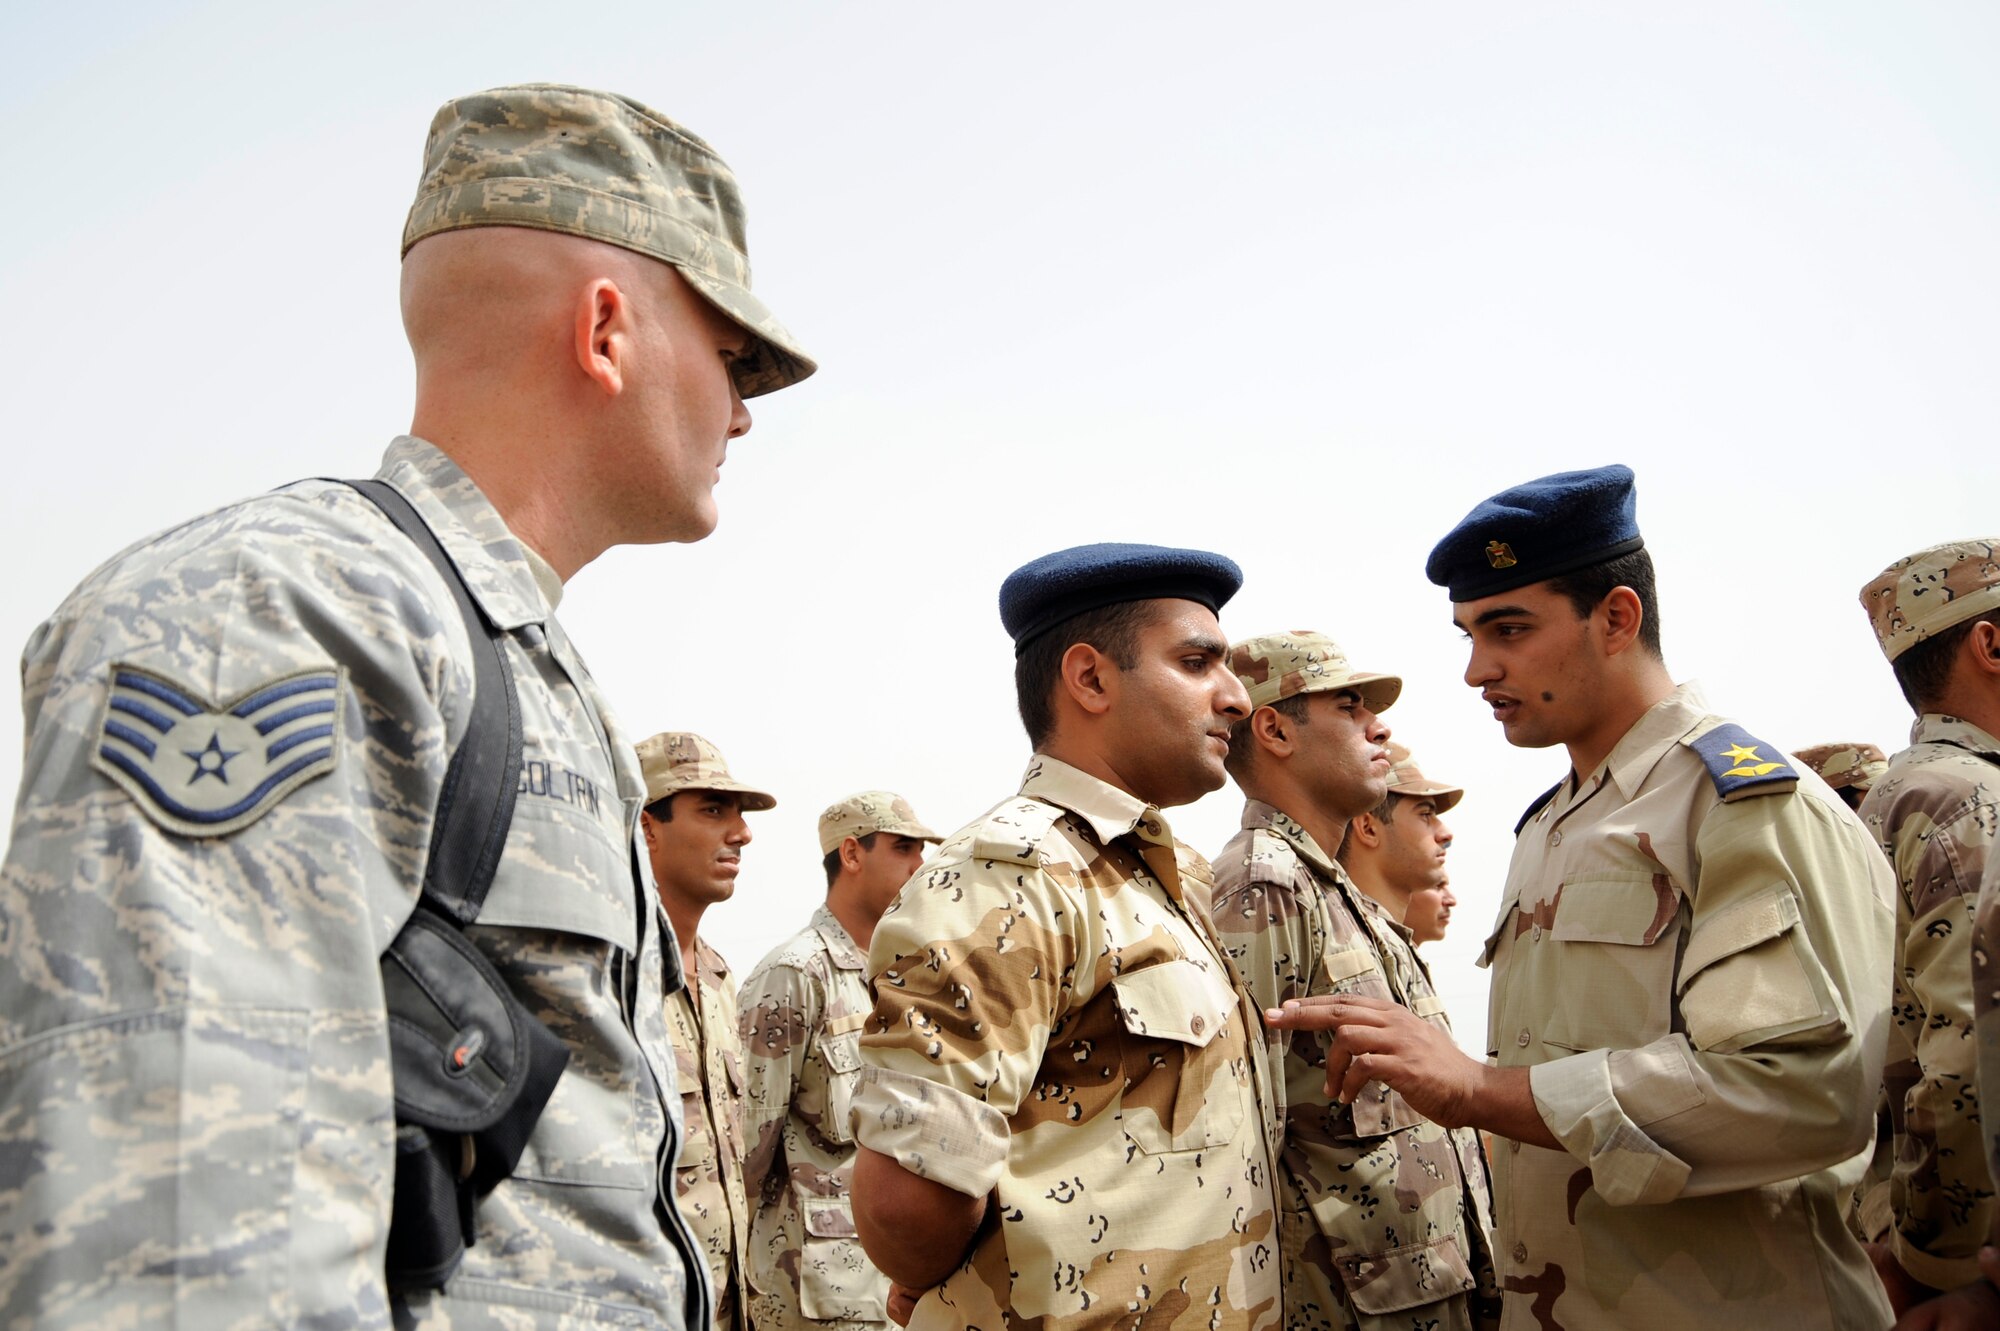 AL TAJI AIR BASE, Iraq -- U.S. Air Force Staff Sgt. Matthew Coltrin, left, a military training instructor air advisor, 370th Expeditionary Training Squadron, watches Iraqi air force Lt. Ali, right, military training instructor, explain the importance of military bearing to a warrant officer during parade practice. (U.S. Air Force photo/Staff Sgt. Paul Villanueva II)